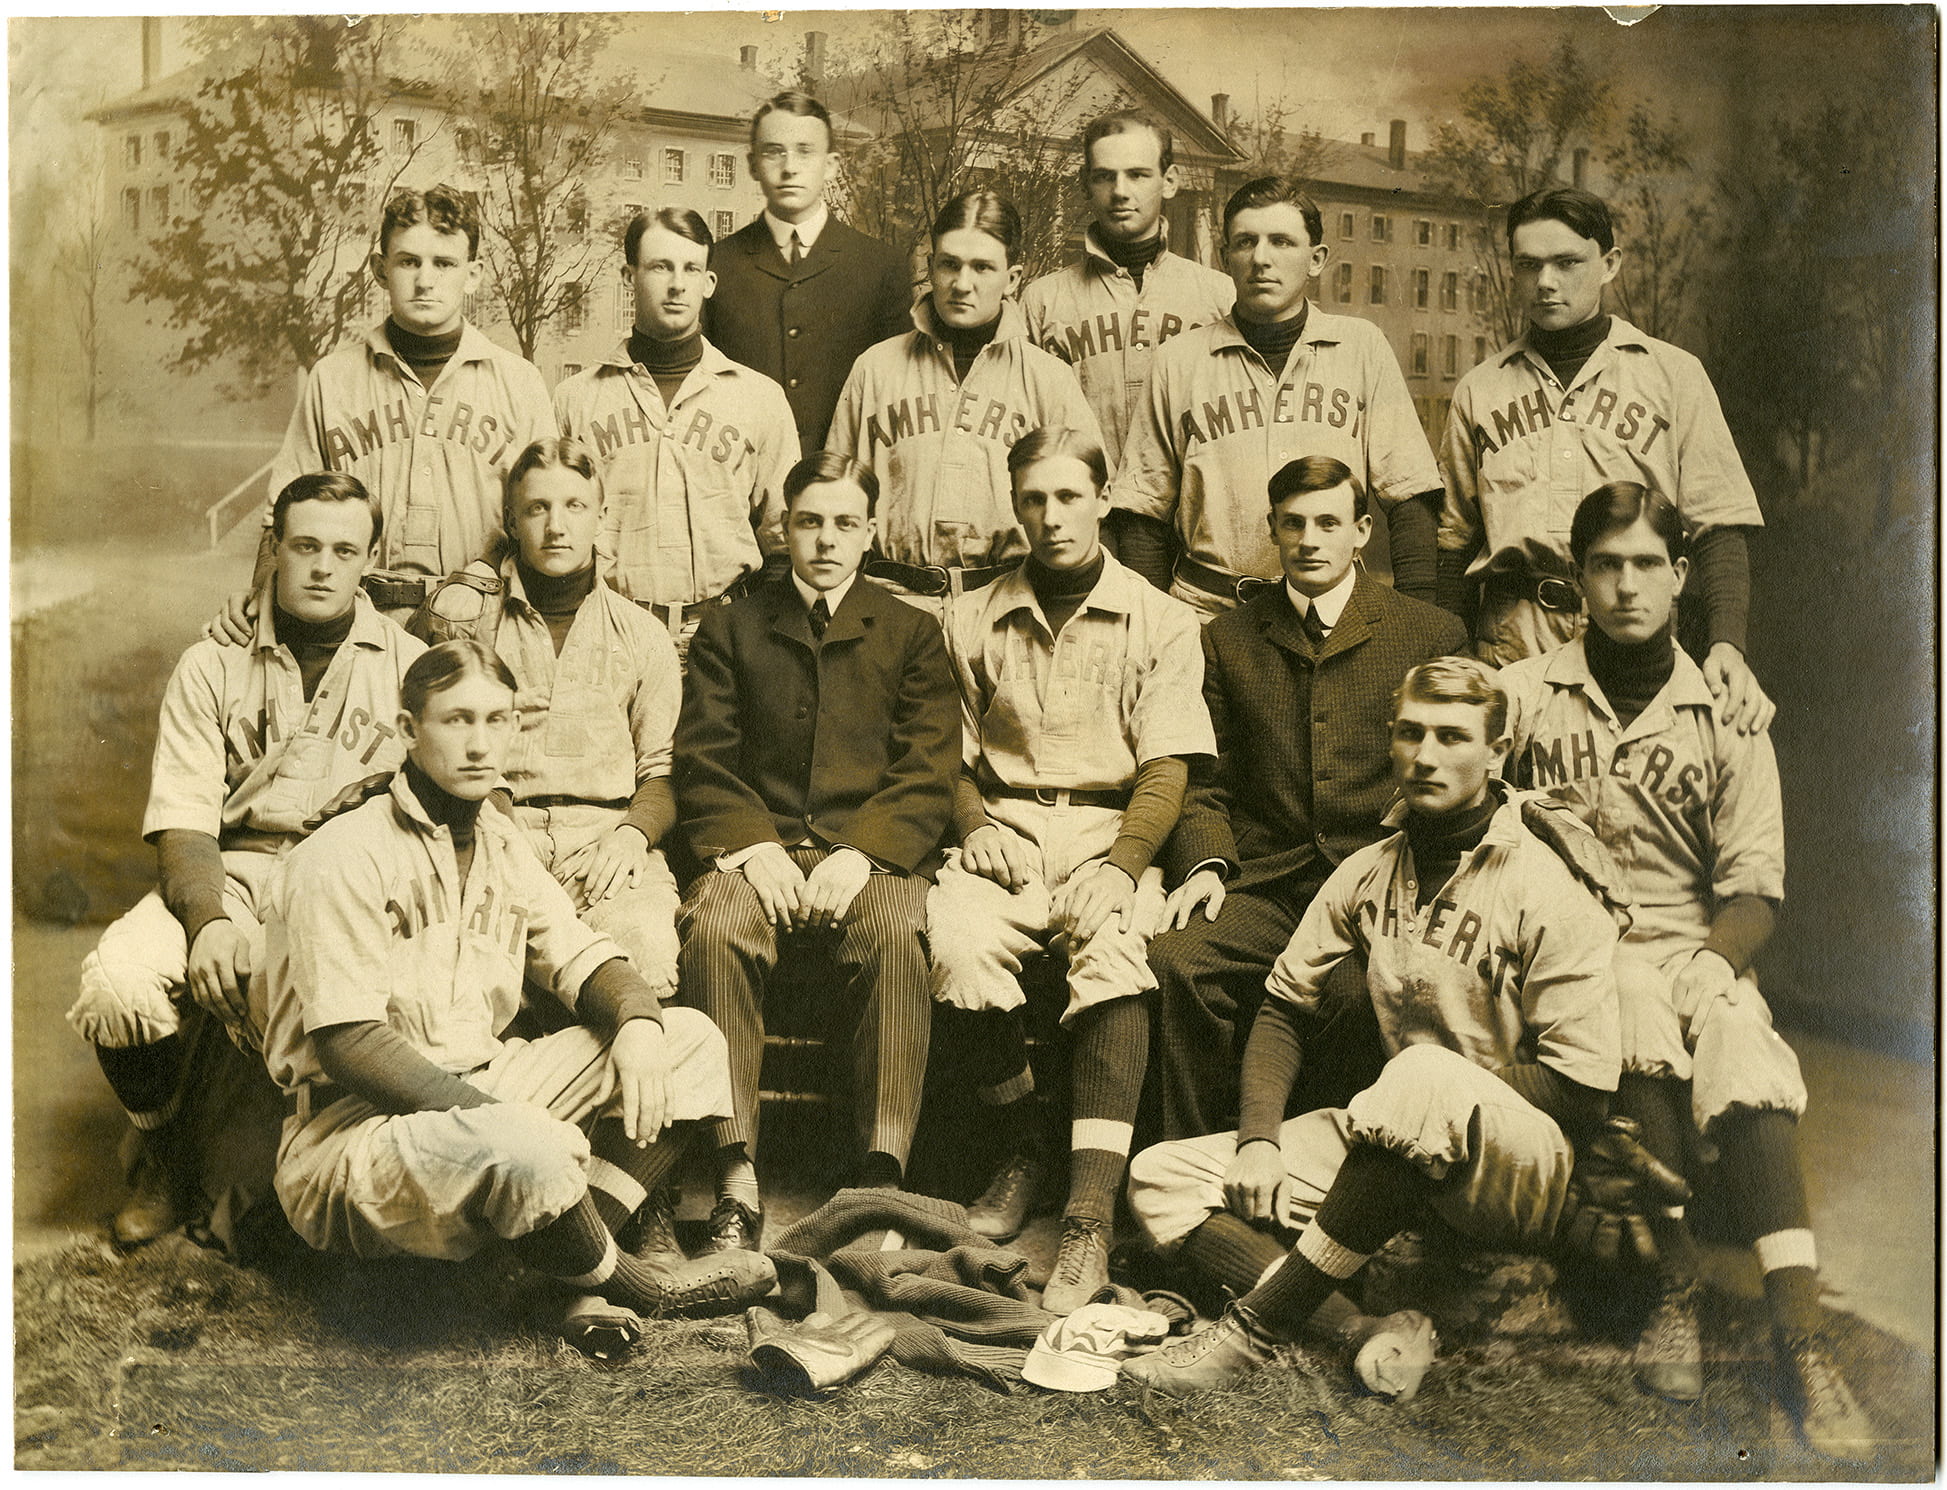 Amherst's baseball team of 1902. Dunleavy and Kane are seen sitting together in the middle row, far right.